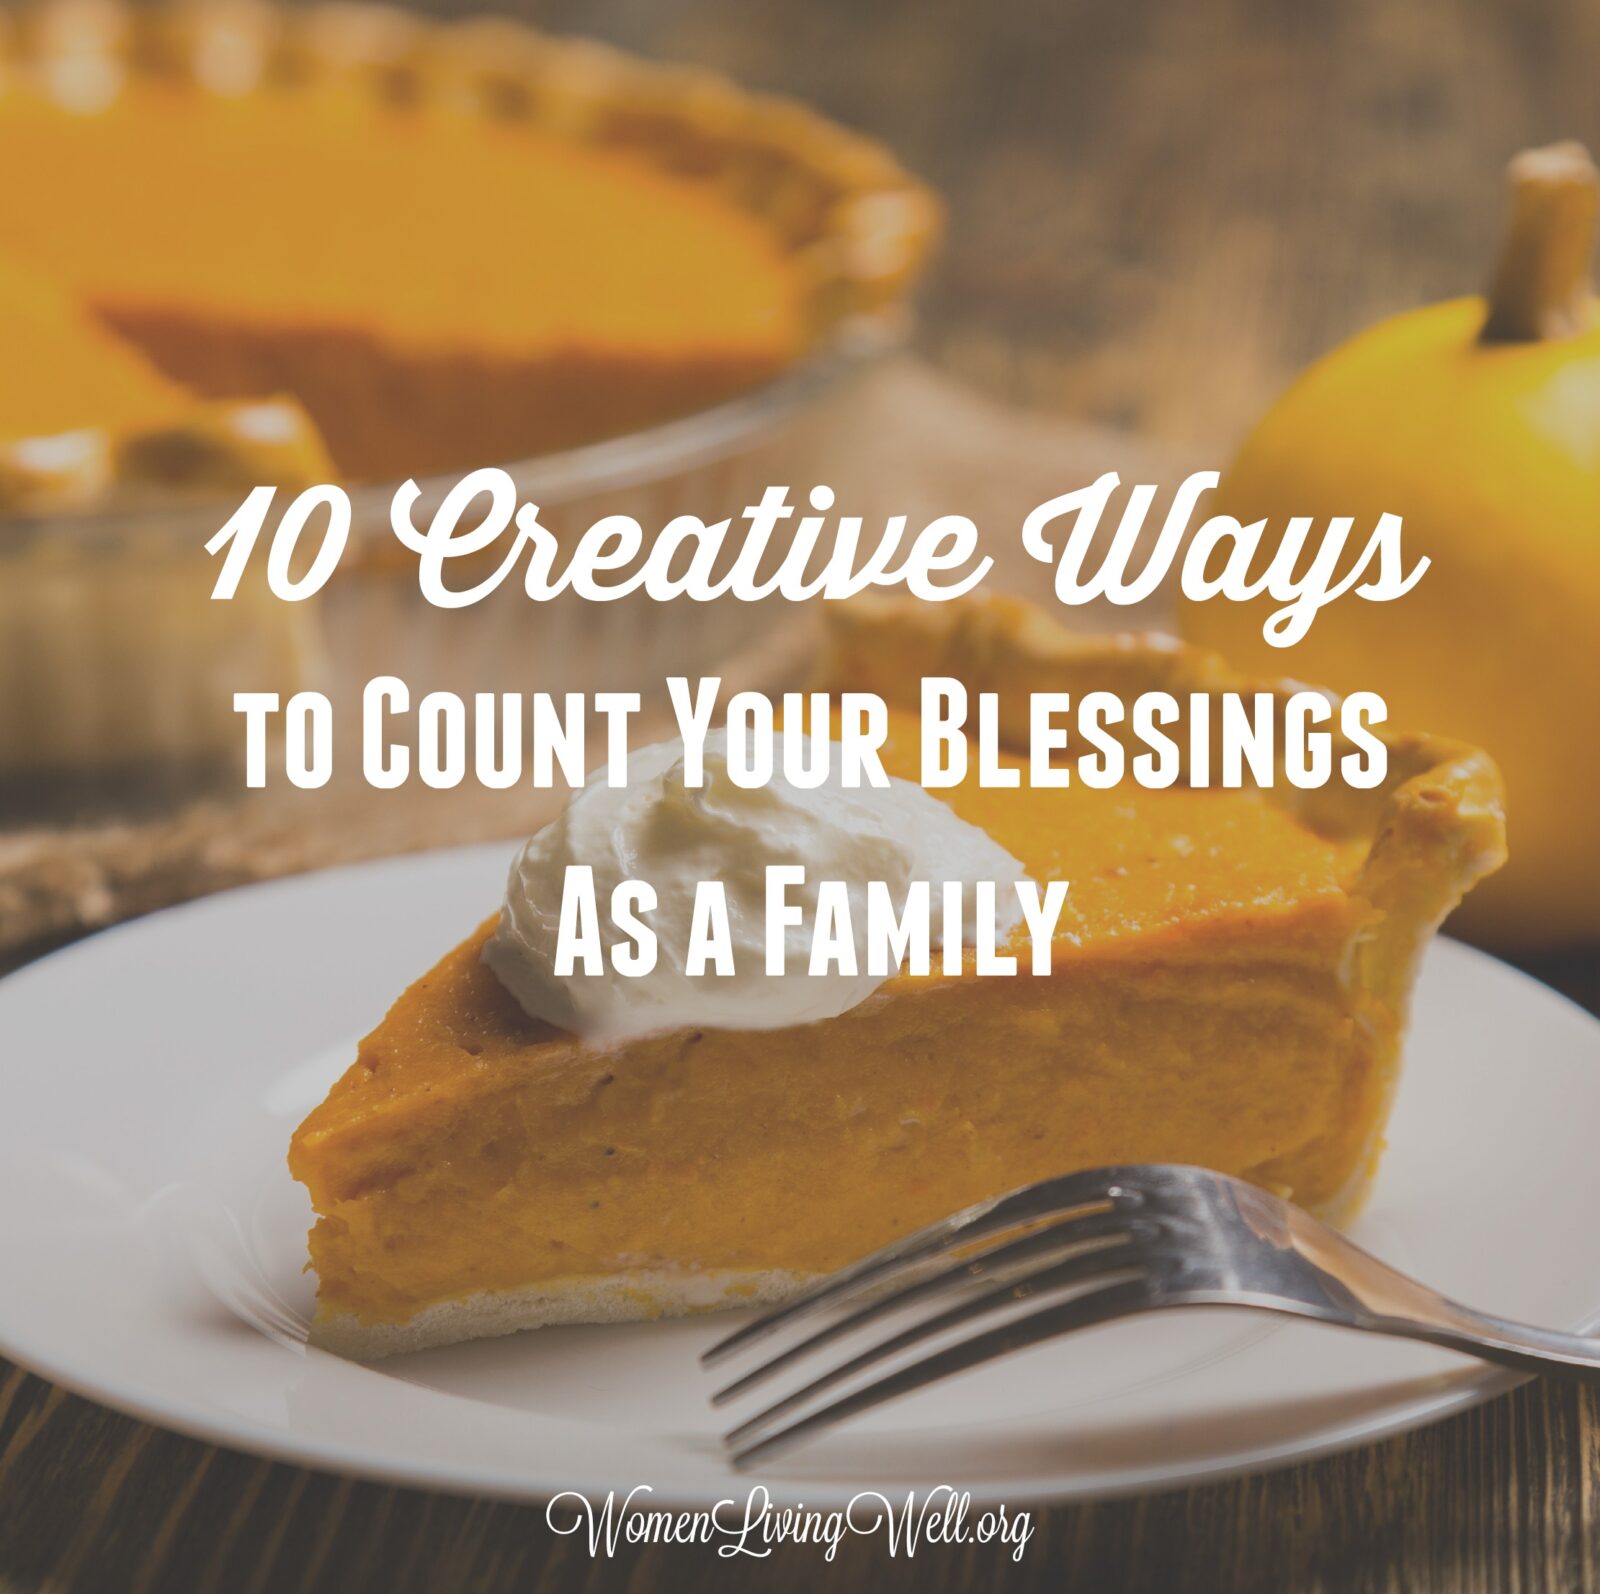 10 Creative Ways to Count Your Blessings As a Family